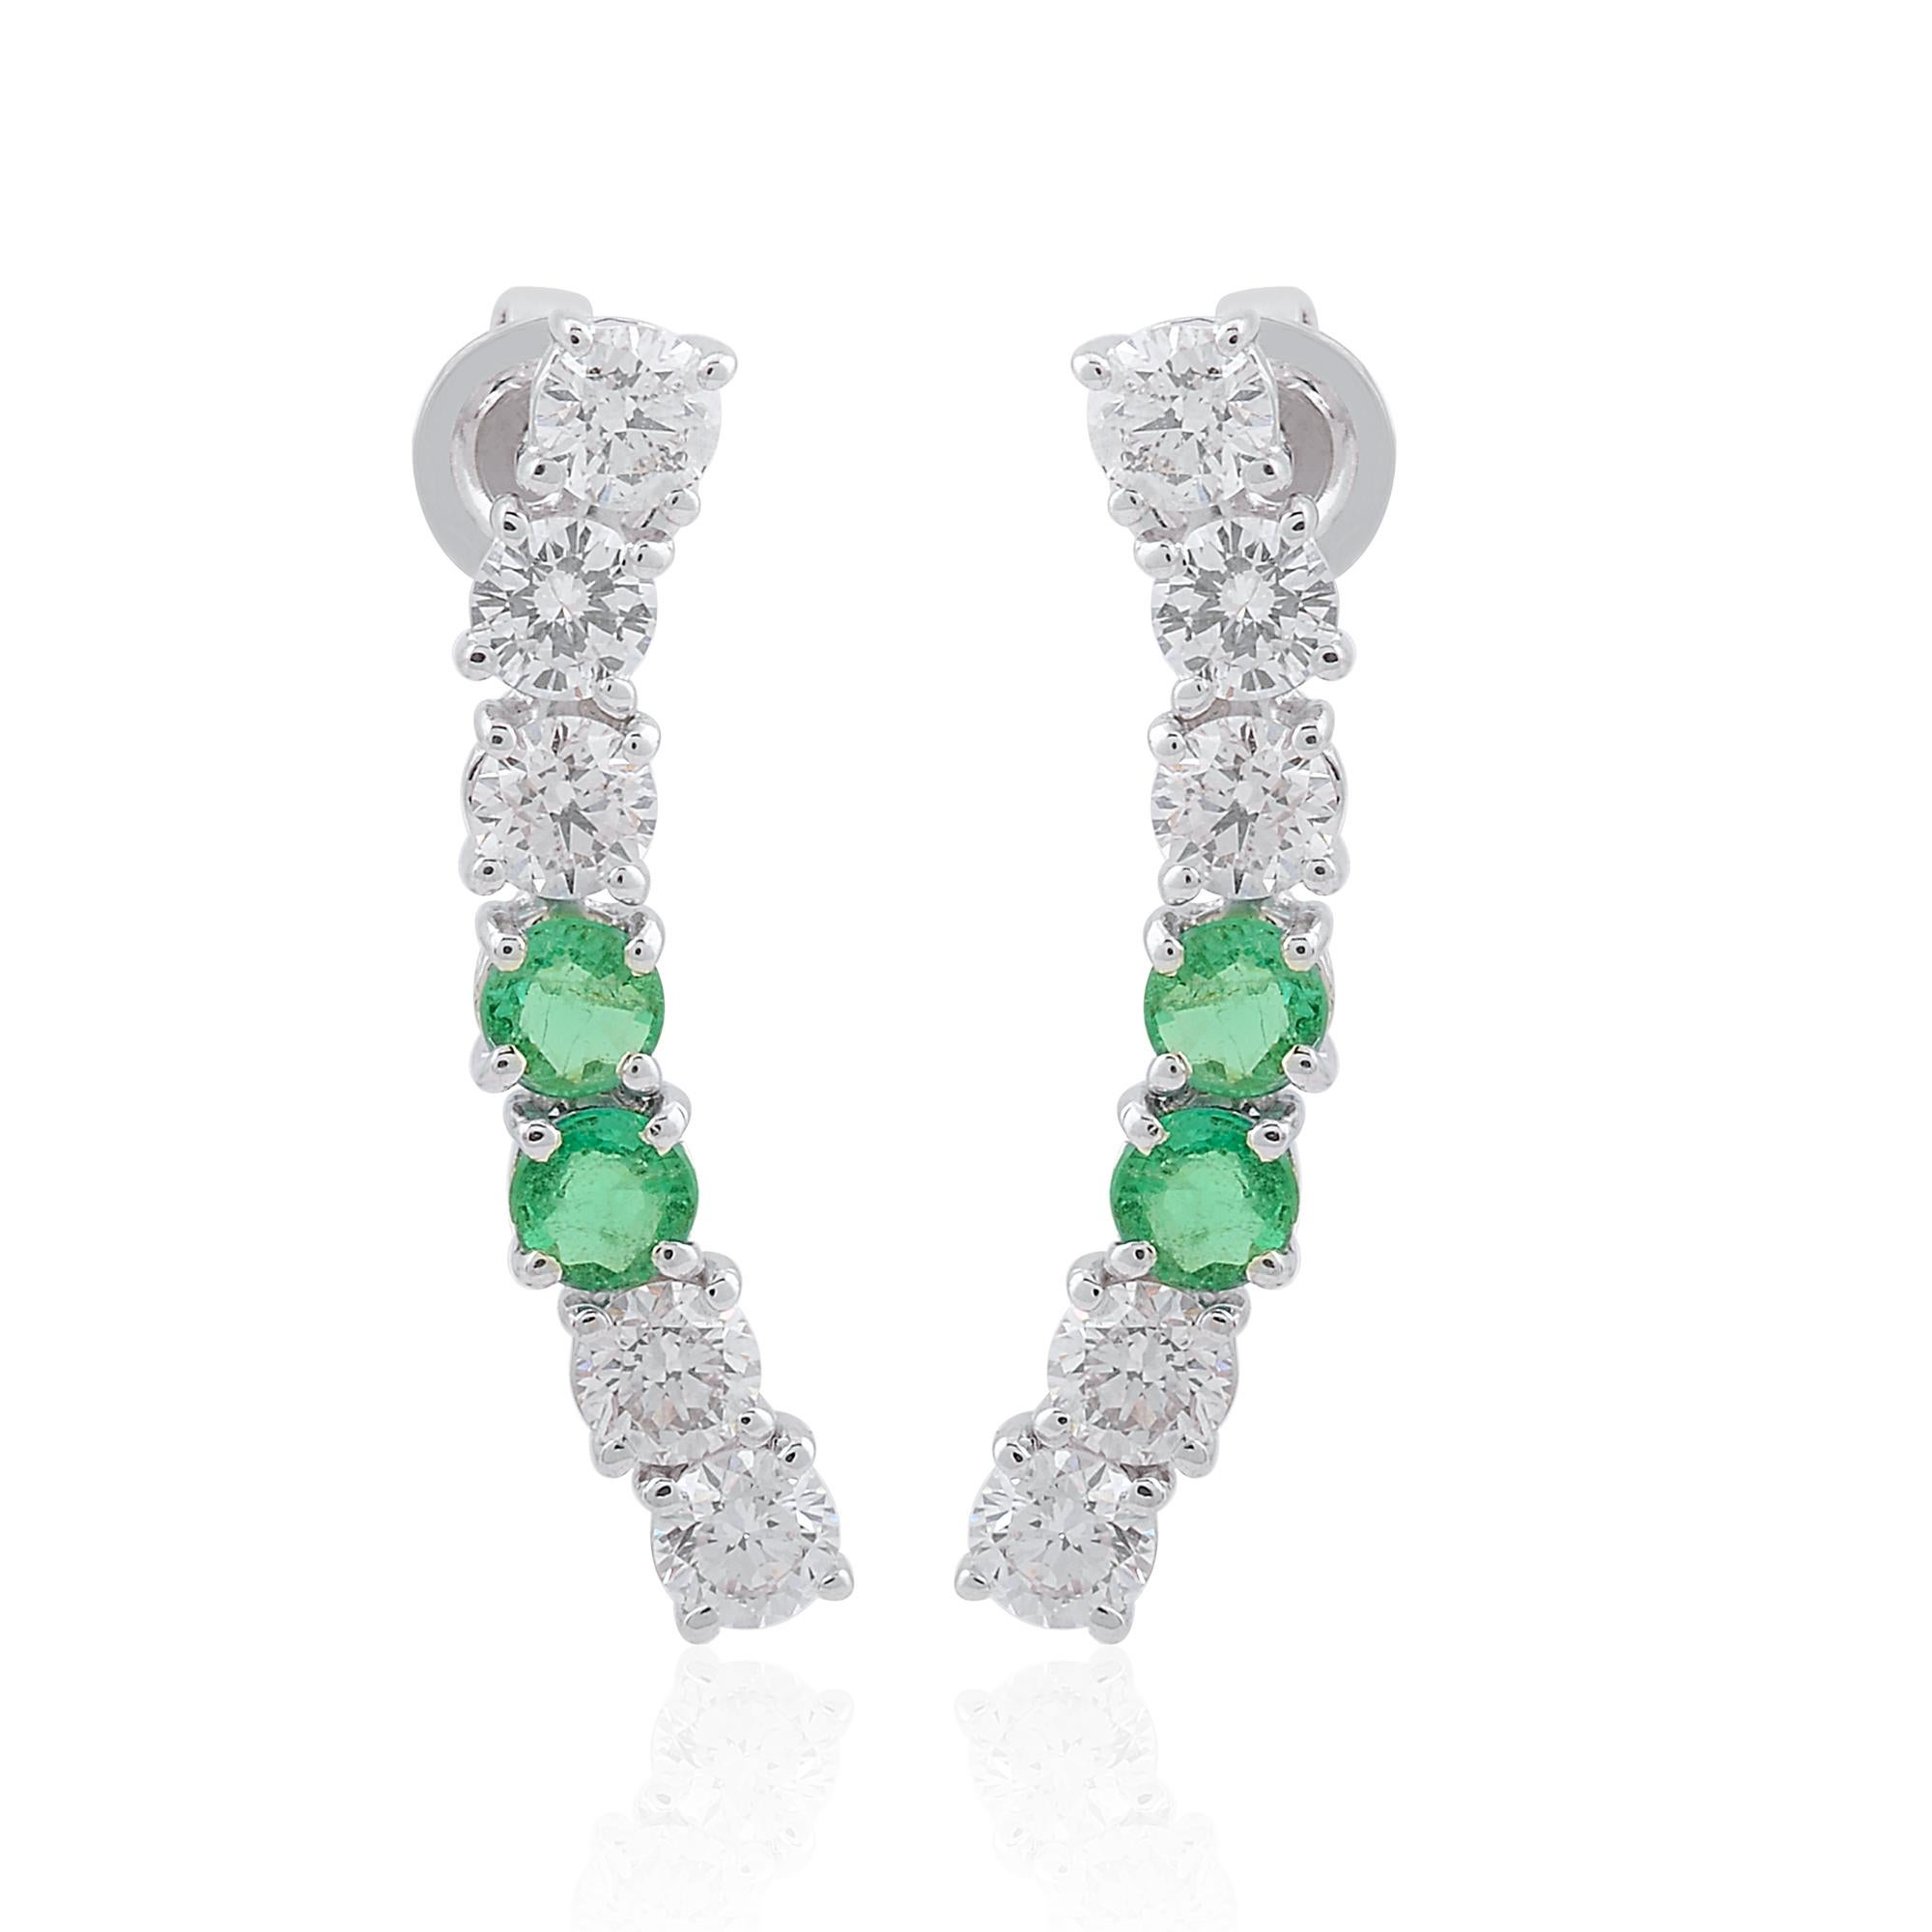 Item Code :- SEE-1516
Gross Weight :- 3.14 gm
18k White Gold Weight :- 2.76 gm
Diamond Wt :- 1.34 Ct  ( AVERAGE DIAMOND CLARITY SI1-SI2 & COLOR H-I )
Emerald Wt :- 0.55 Ct
Earrings Size :- 22x7 mm approx.
✦ Sizing
.....................
We can adjust